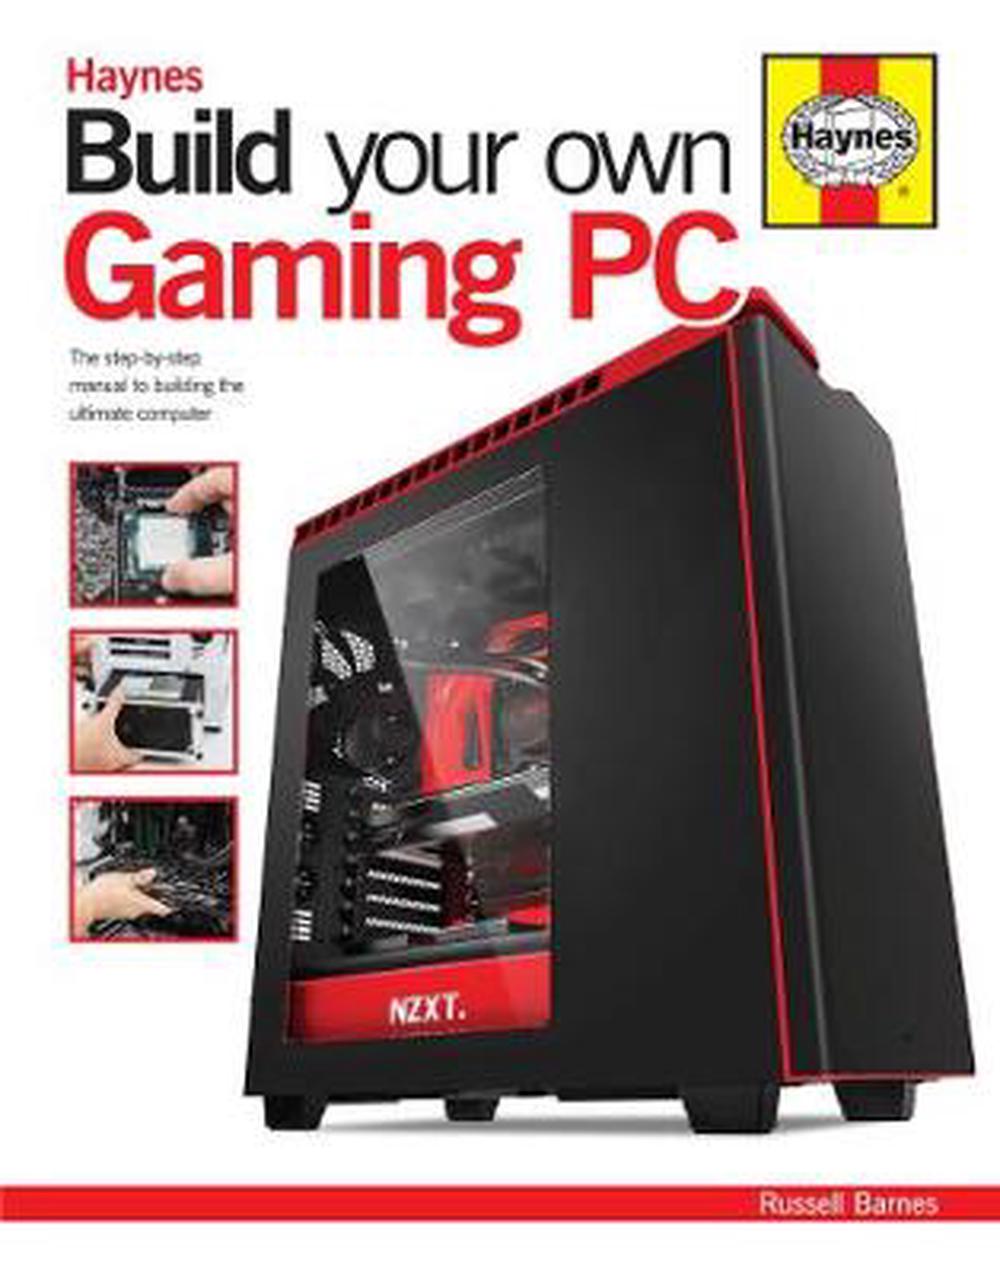 Curved Building Your Own Gaming Pc for Small Bedroom